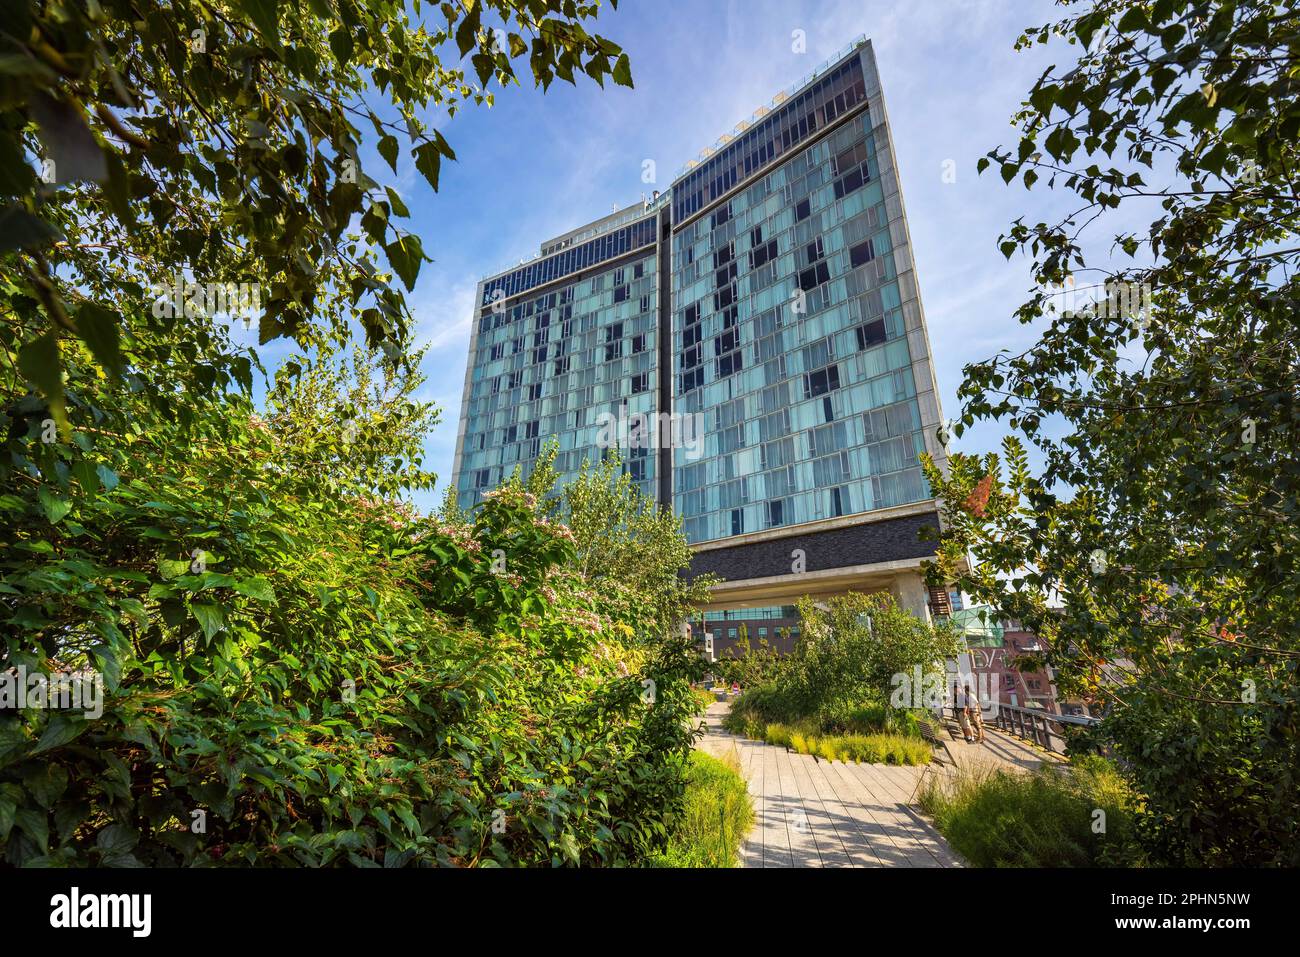 United States, New York City, Manhattan, Greenwich Village. The Highline aerial green-way in summer morning light with the Standard High Line Hotel. G Stock Photo